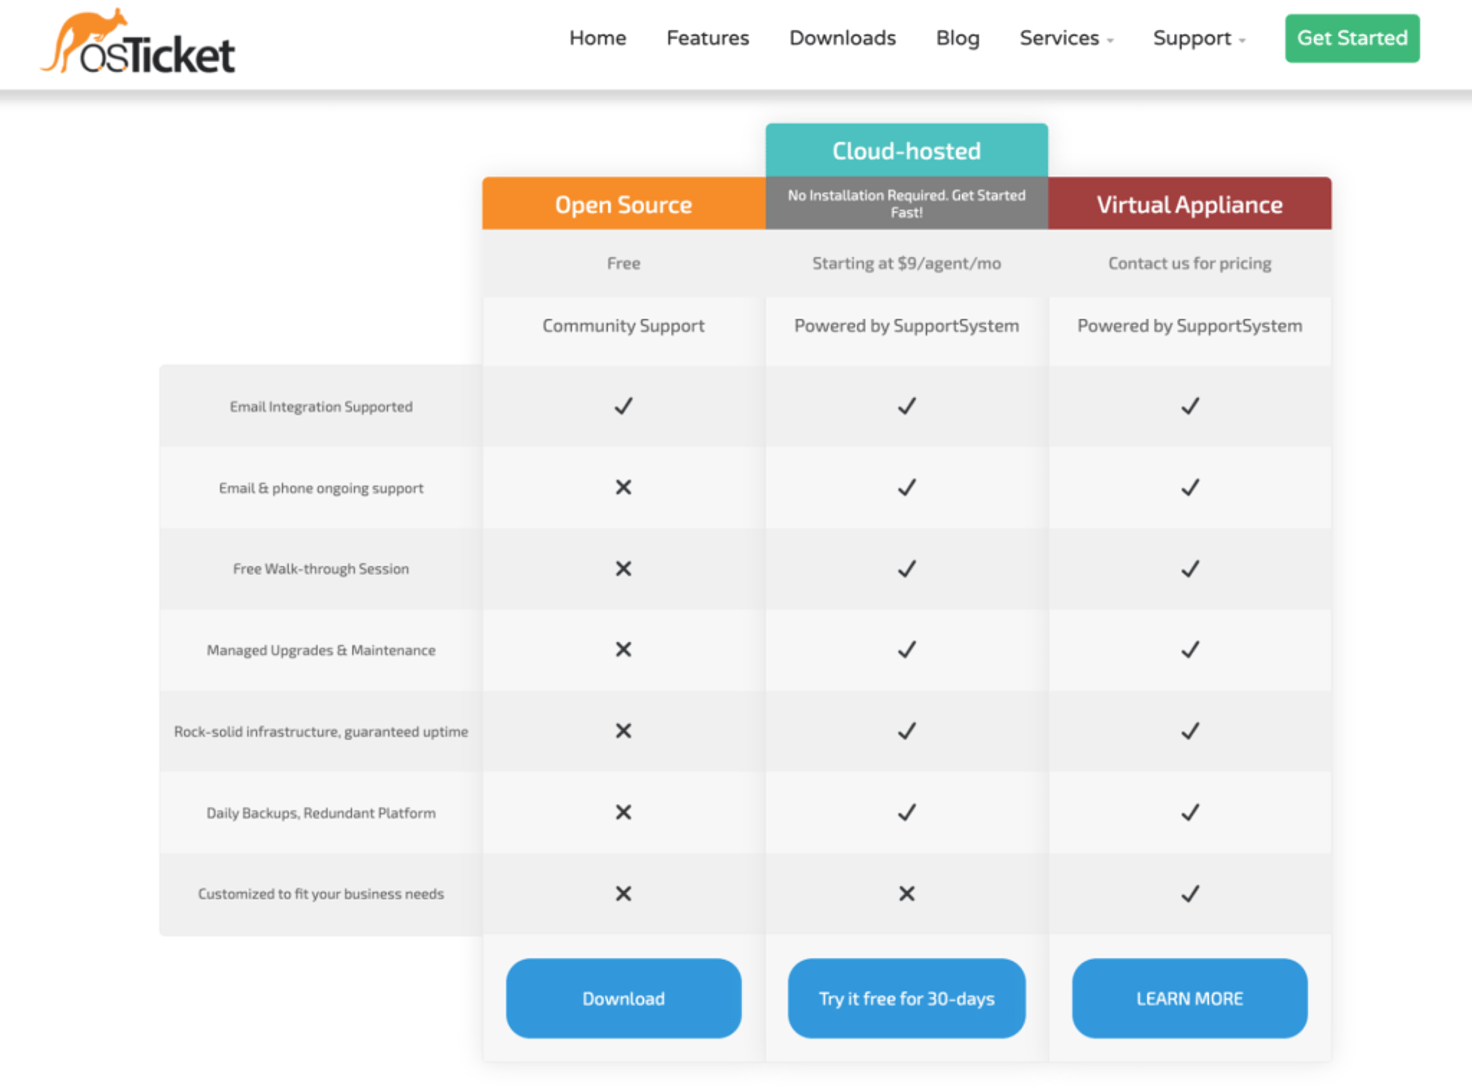 osTicket: Open Source vs Cloud Hosted vs Virtual Appliance